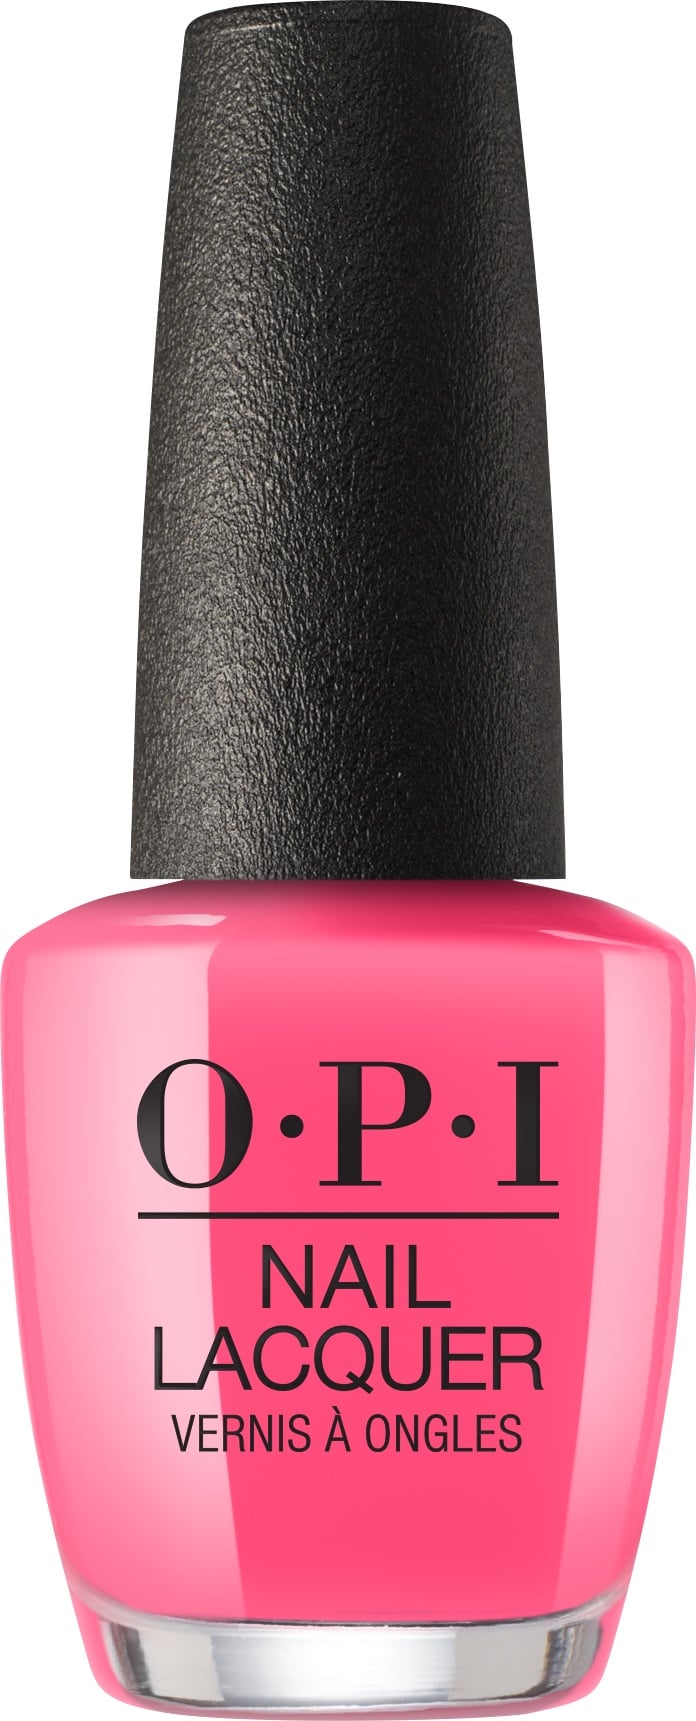 OPI Nail Lacquer in VIPink Passes